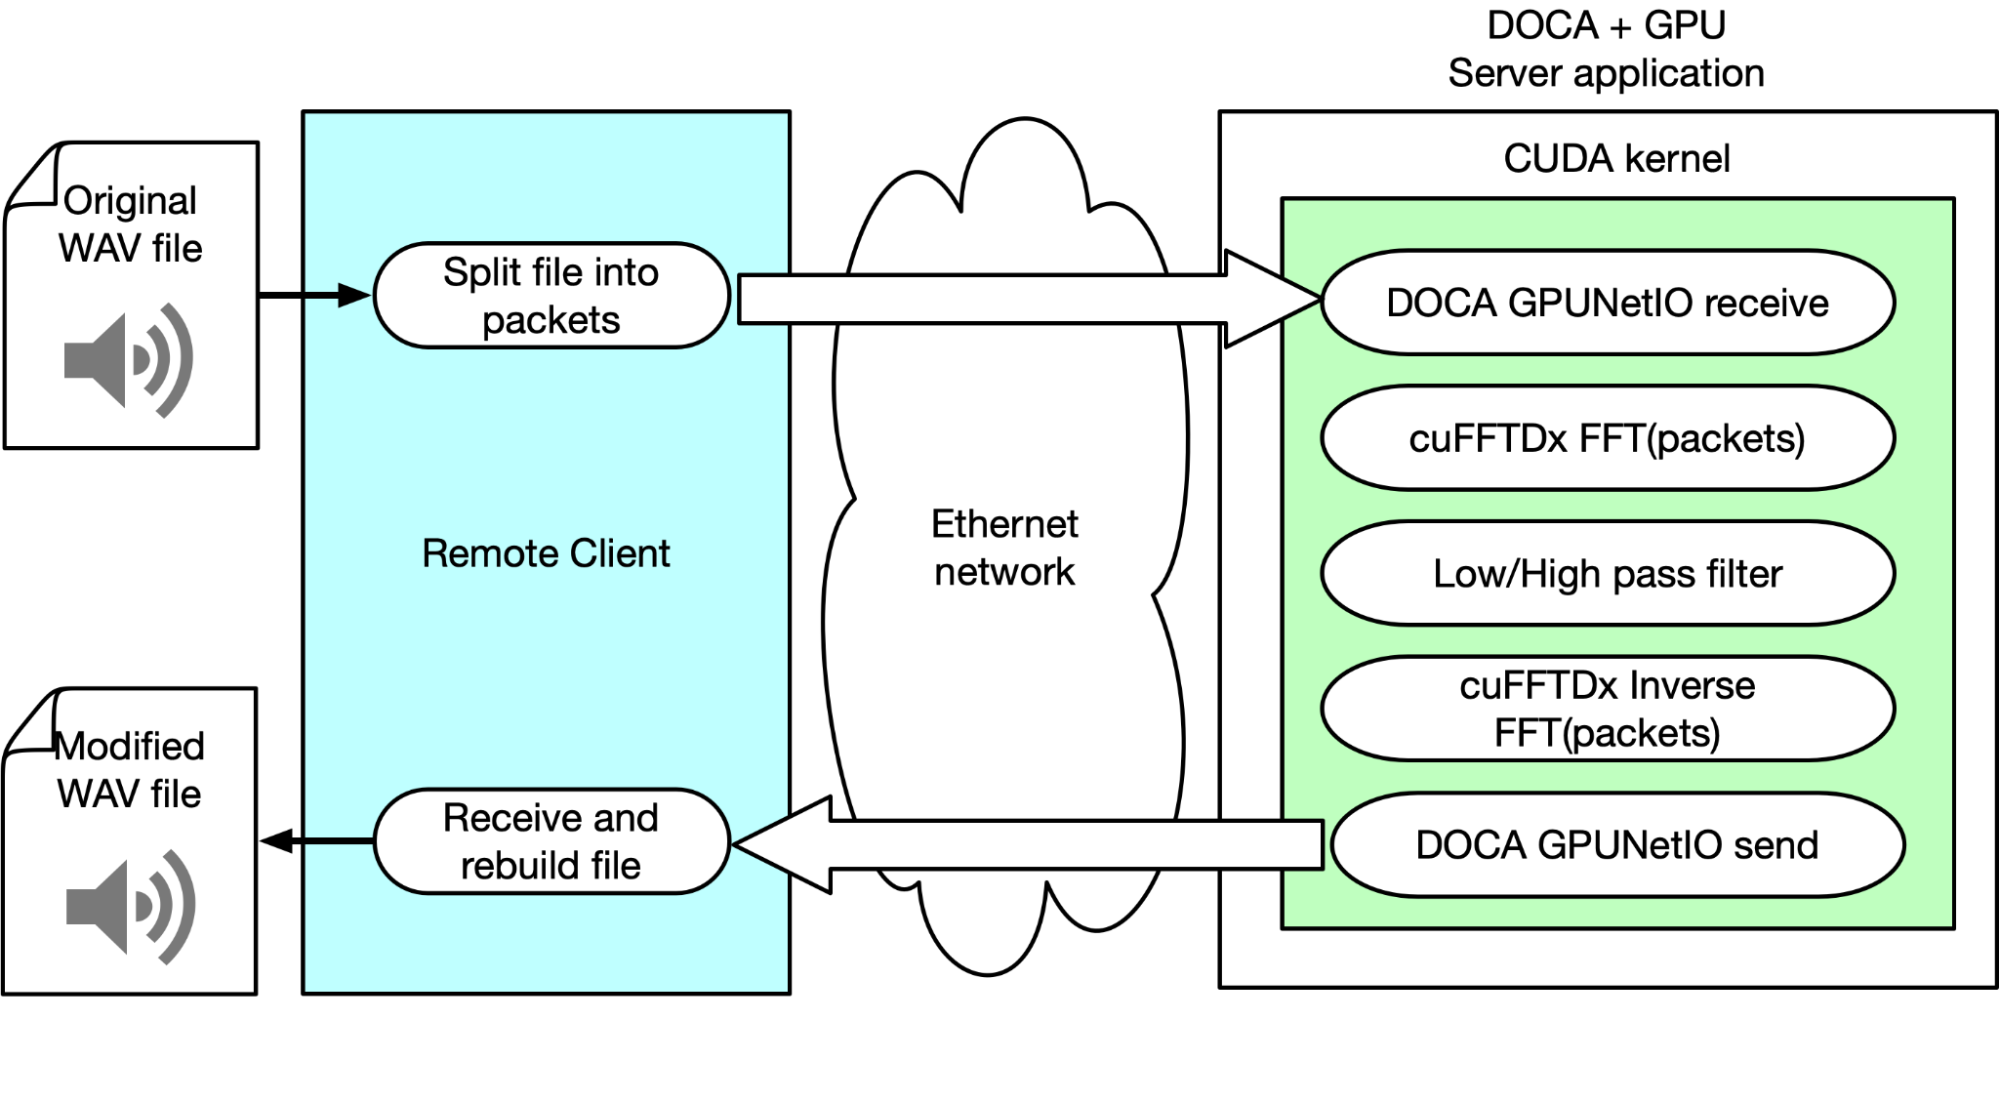 Diagram depicting the client-server architecture where the client splits a WAV file into multiple Ethernet packets and sends them to the server. On the server, a CUDA kernel in a continuous loop receives those packets, applies frequency filters and then sends back the modified packets.